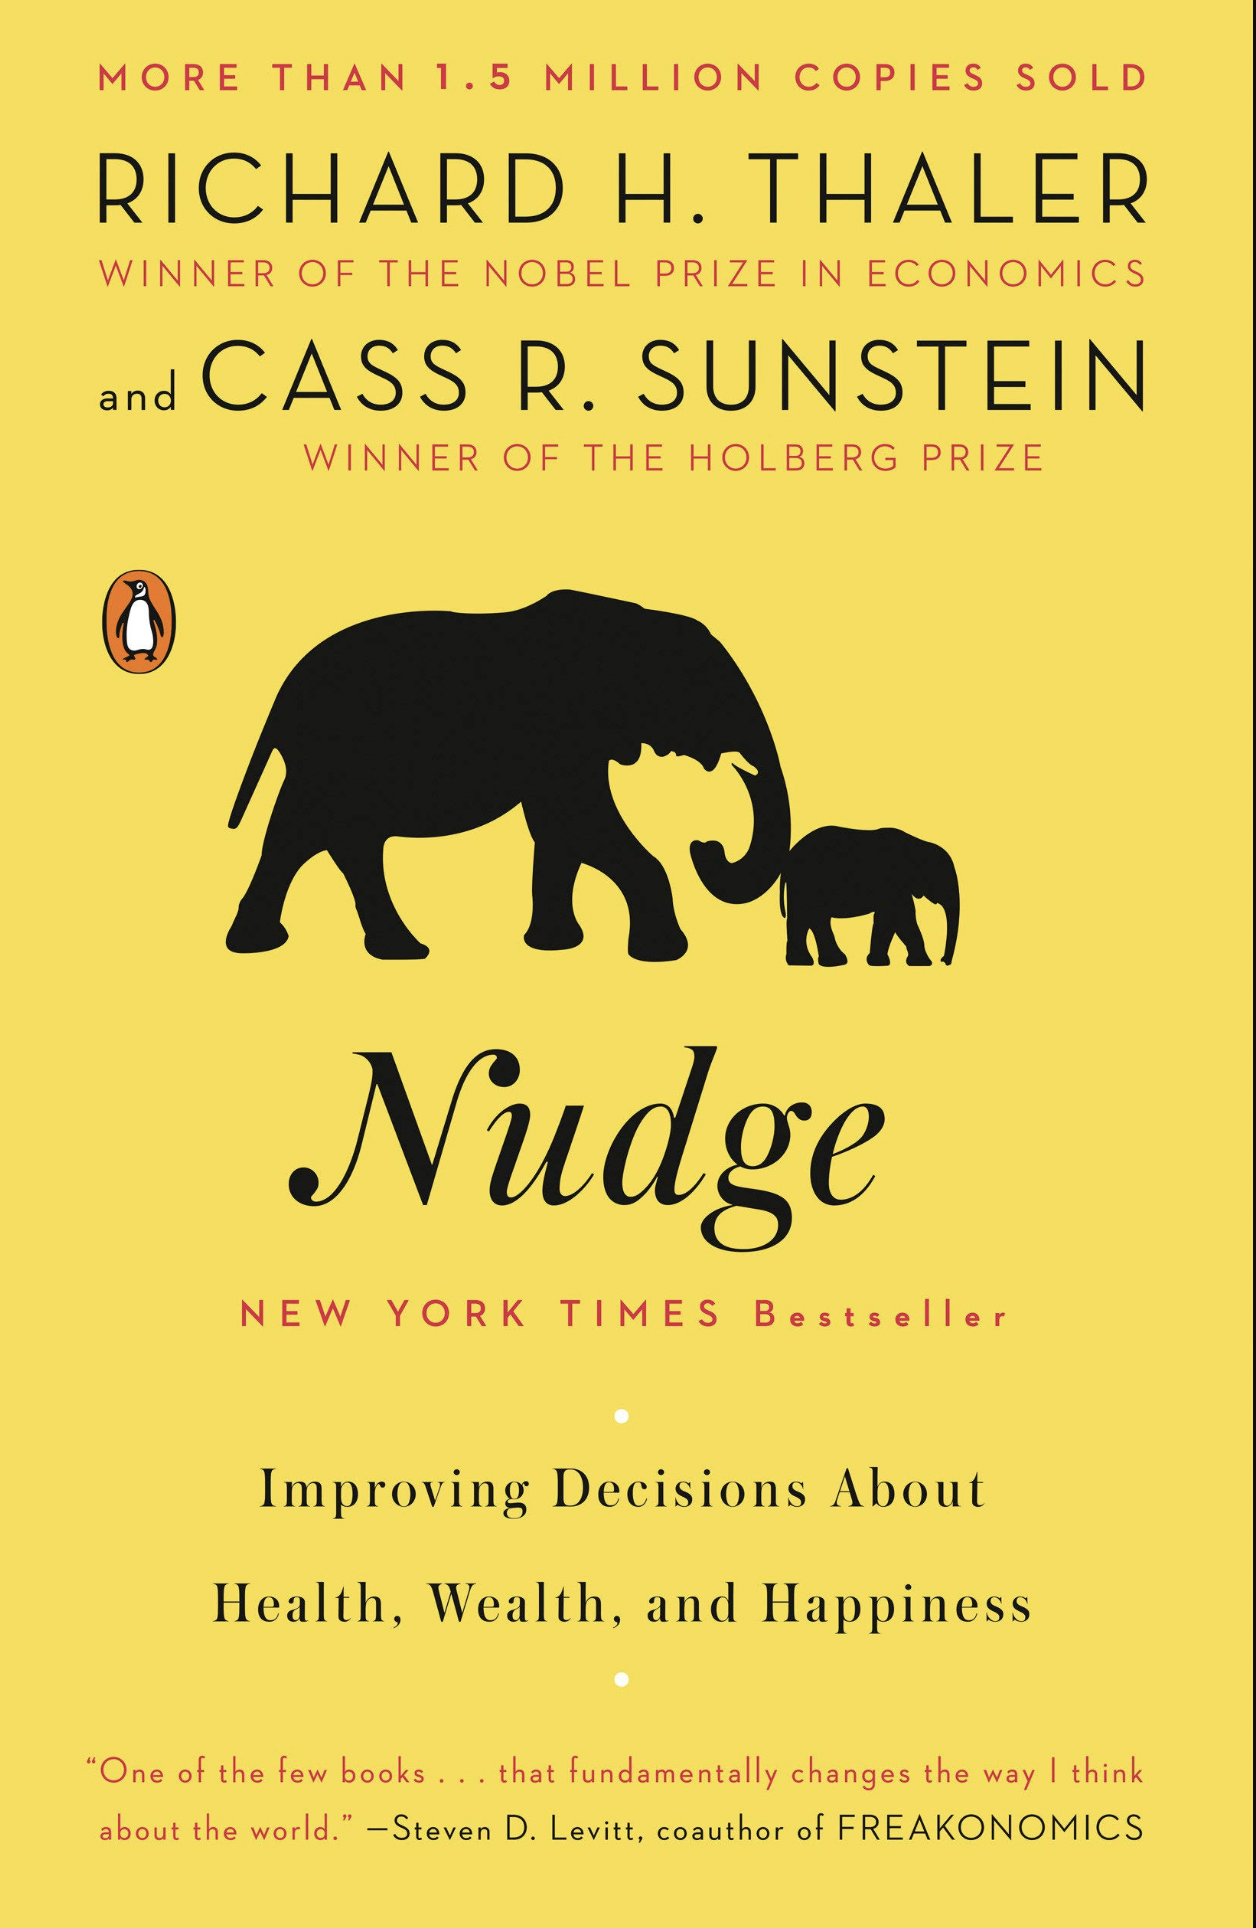 Nudge Improving Decisions About Health, Wealth, and Happiness by Richard H. Thaler and Cass R. Sunstein